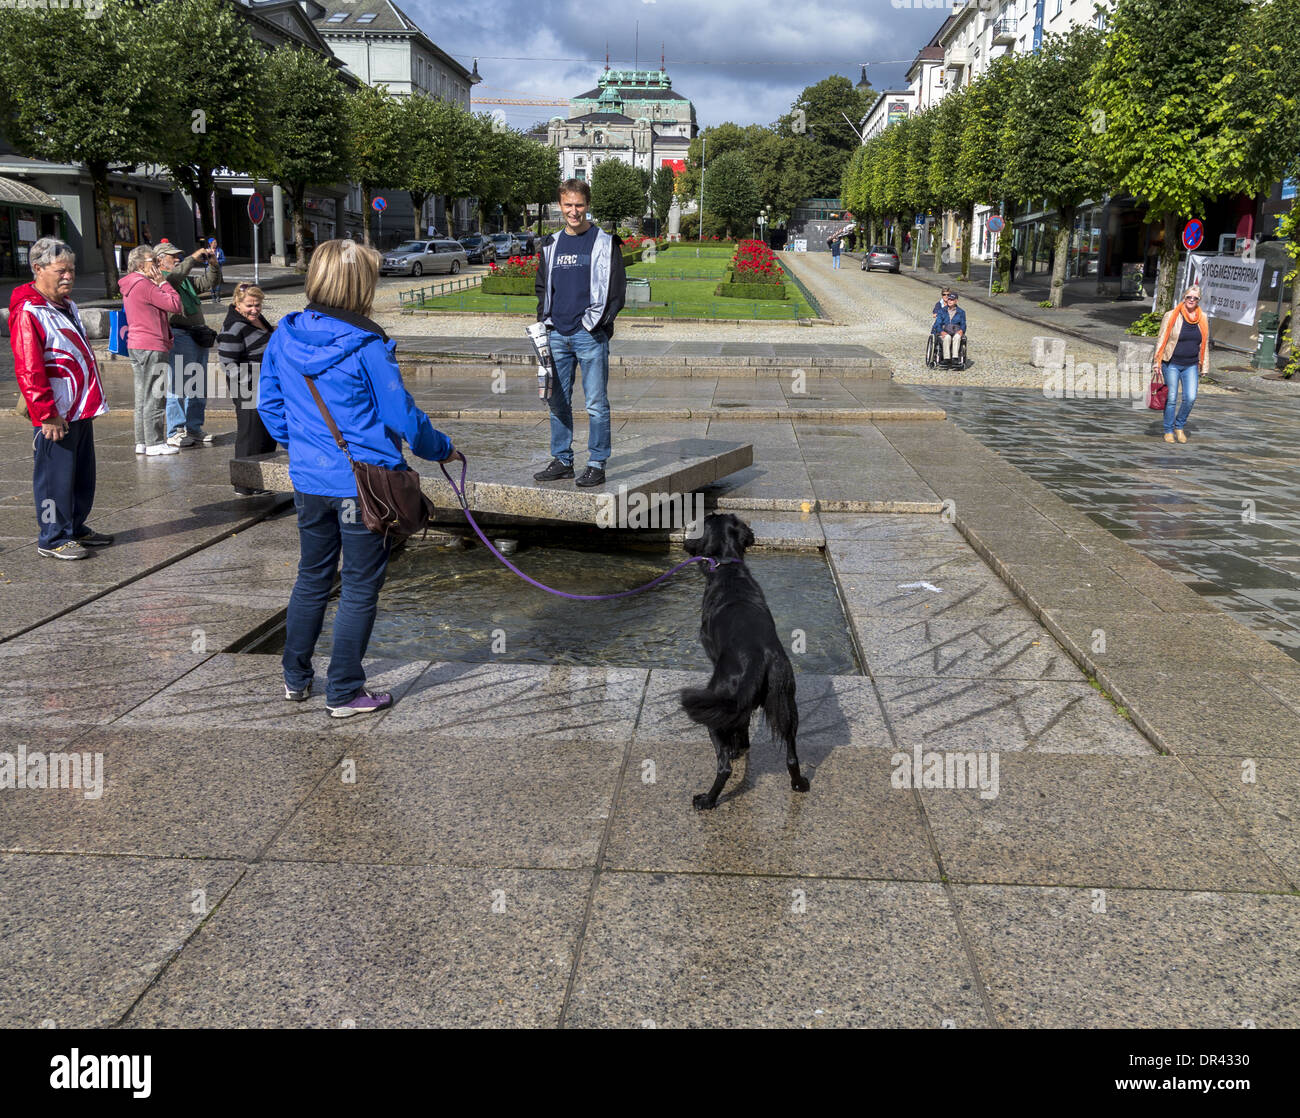 Woman with dog watching man standing on a concrete pedestal Ole Bulls Plass Bergen Norway Stock Photo